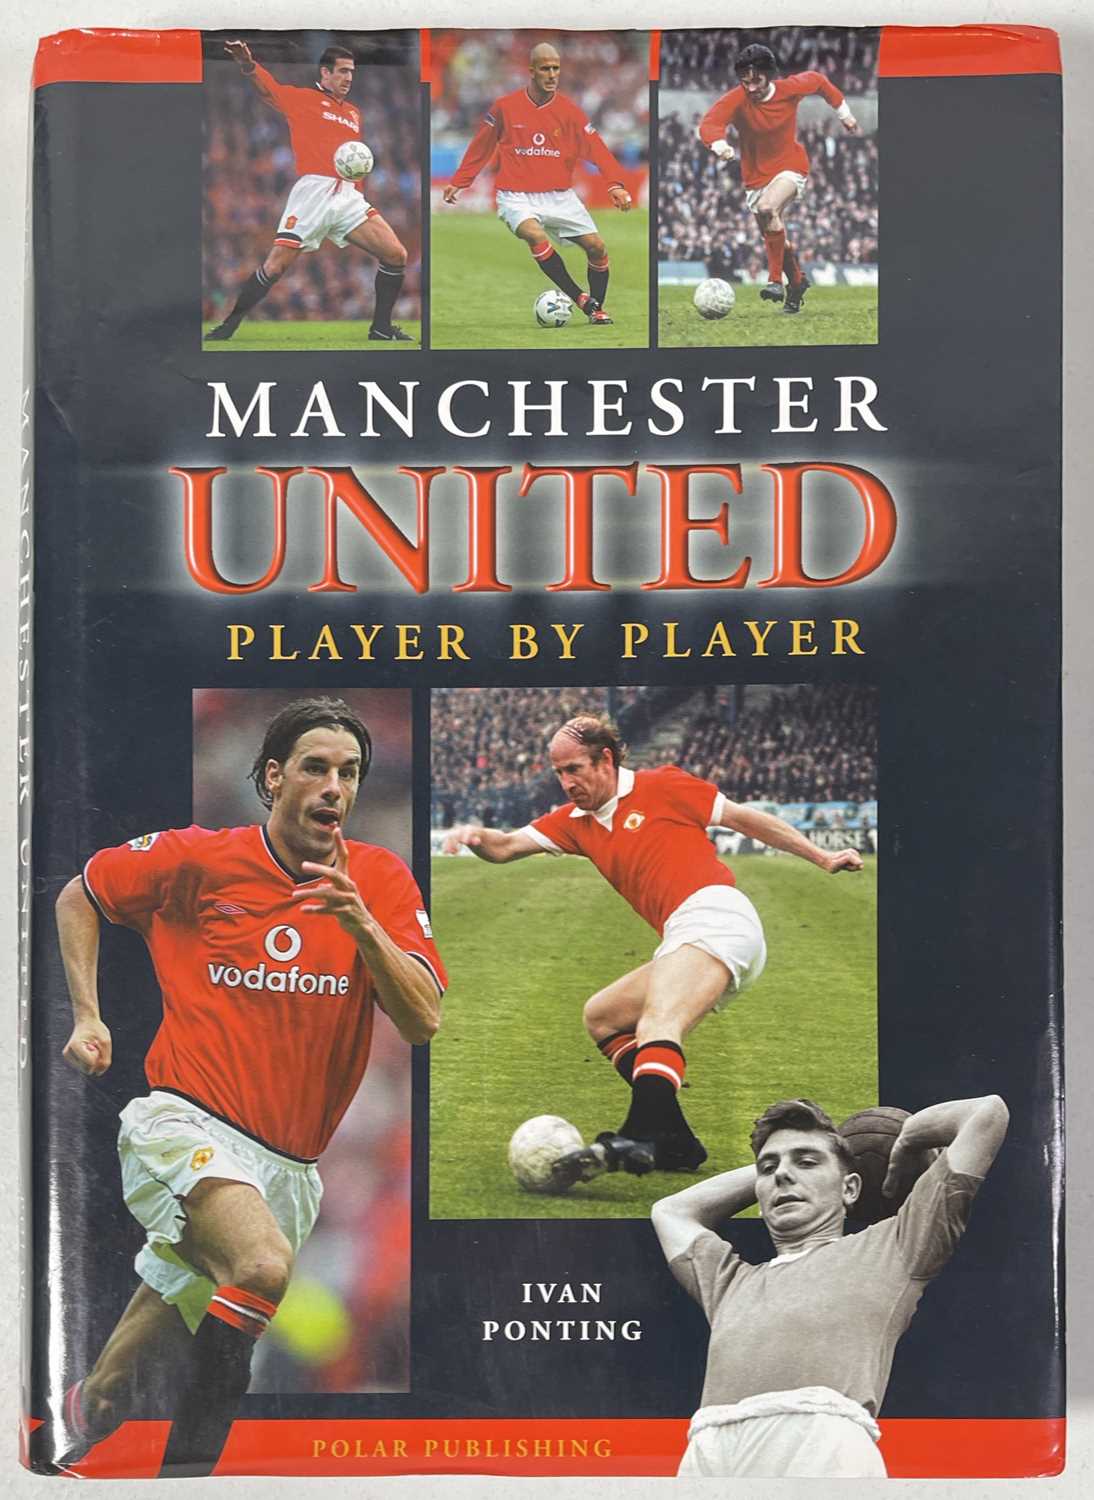 FOOTBALL MEMORABILIA - MANCHESTER UNITED MULTI SIGNED 'PLAYER BY PLAYER' BOOK.